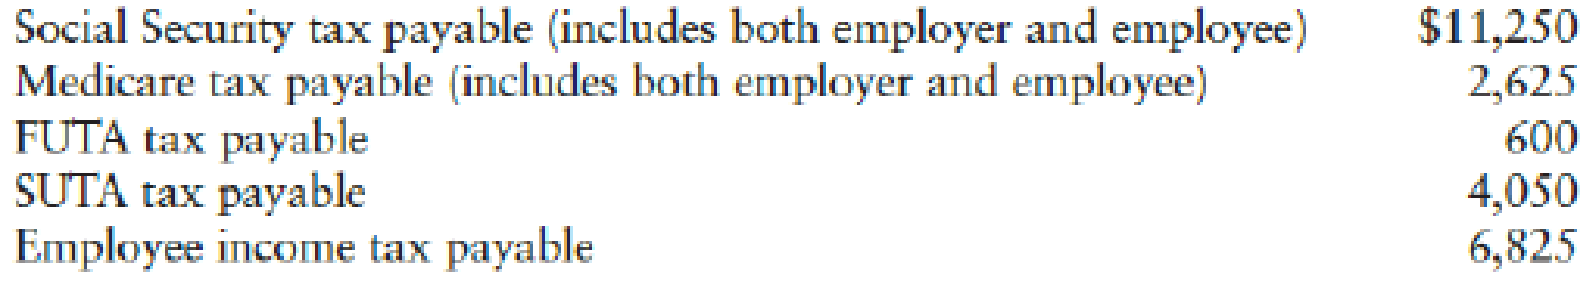 Chapter 9, Problem 5SEA, JOURNAL ENTRIES FOR PAYMENT OF EMPLOYER PAYROLL TAXES Angel Ruiz owns a business called Ruiz 